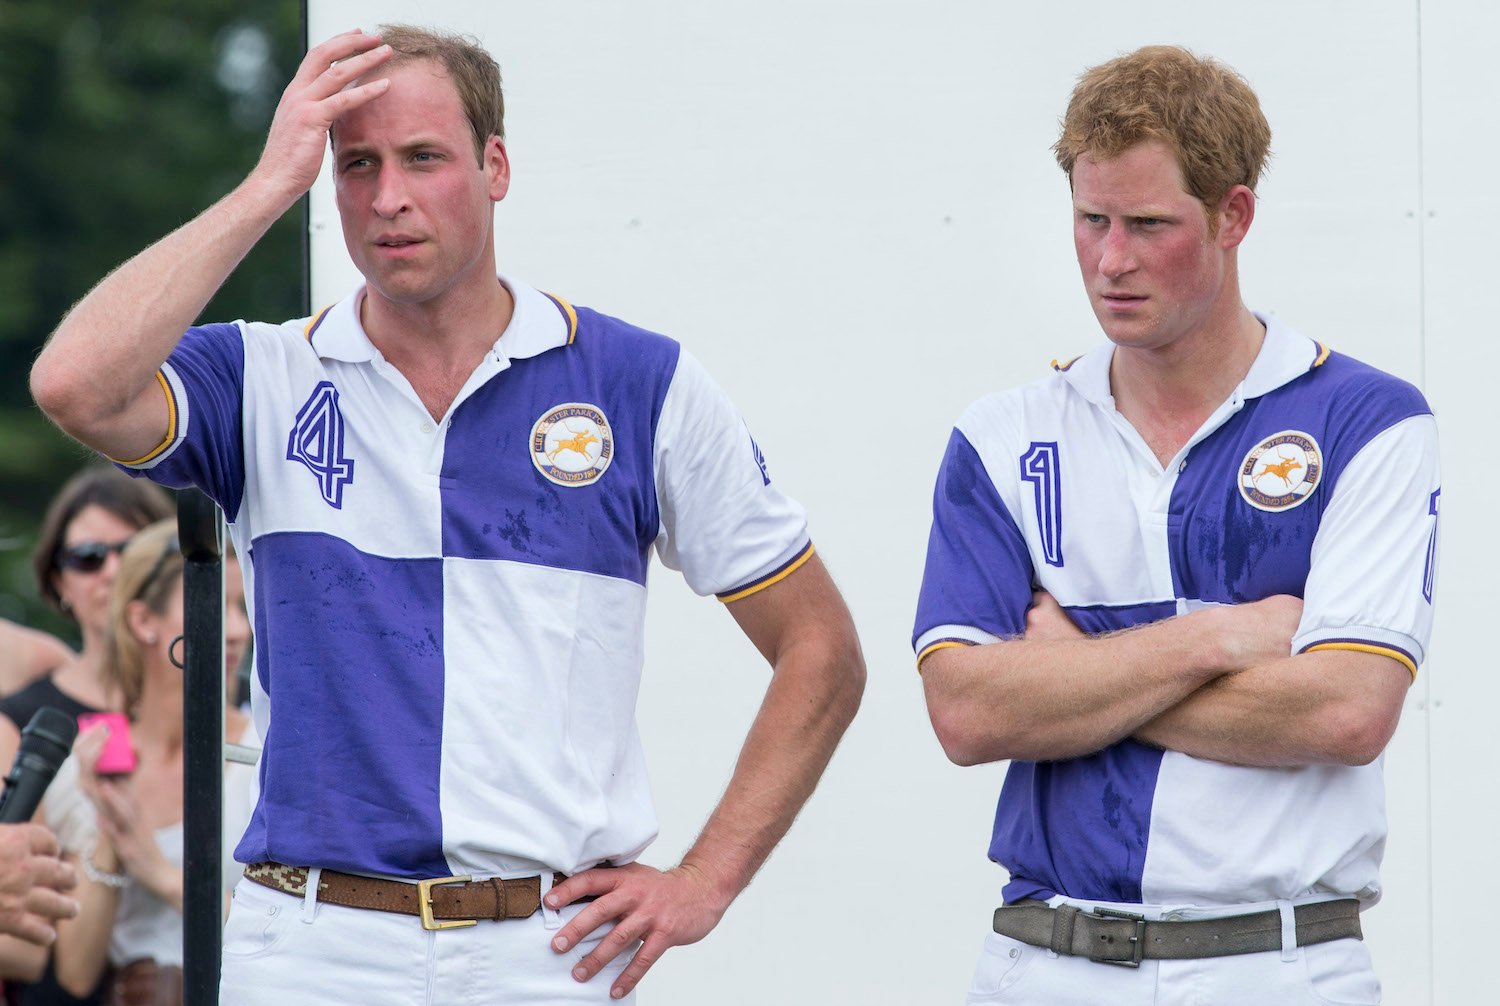 The 'Funny' Way Prince Harry Teased Prince William When They Were Kids,  According to a Royal Insider